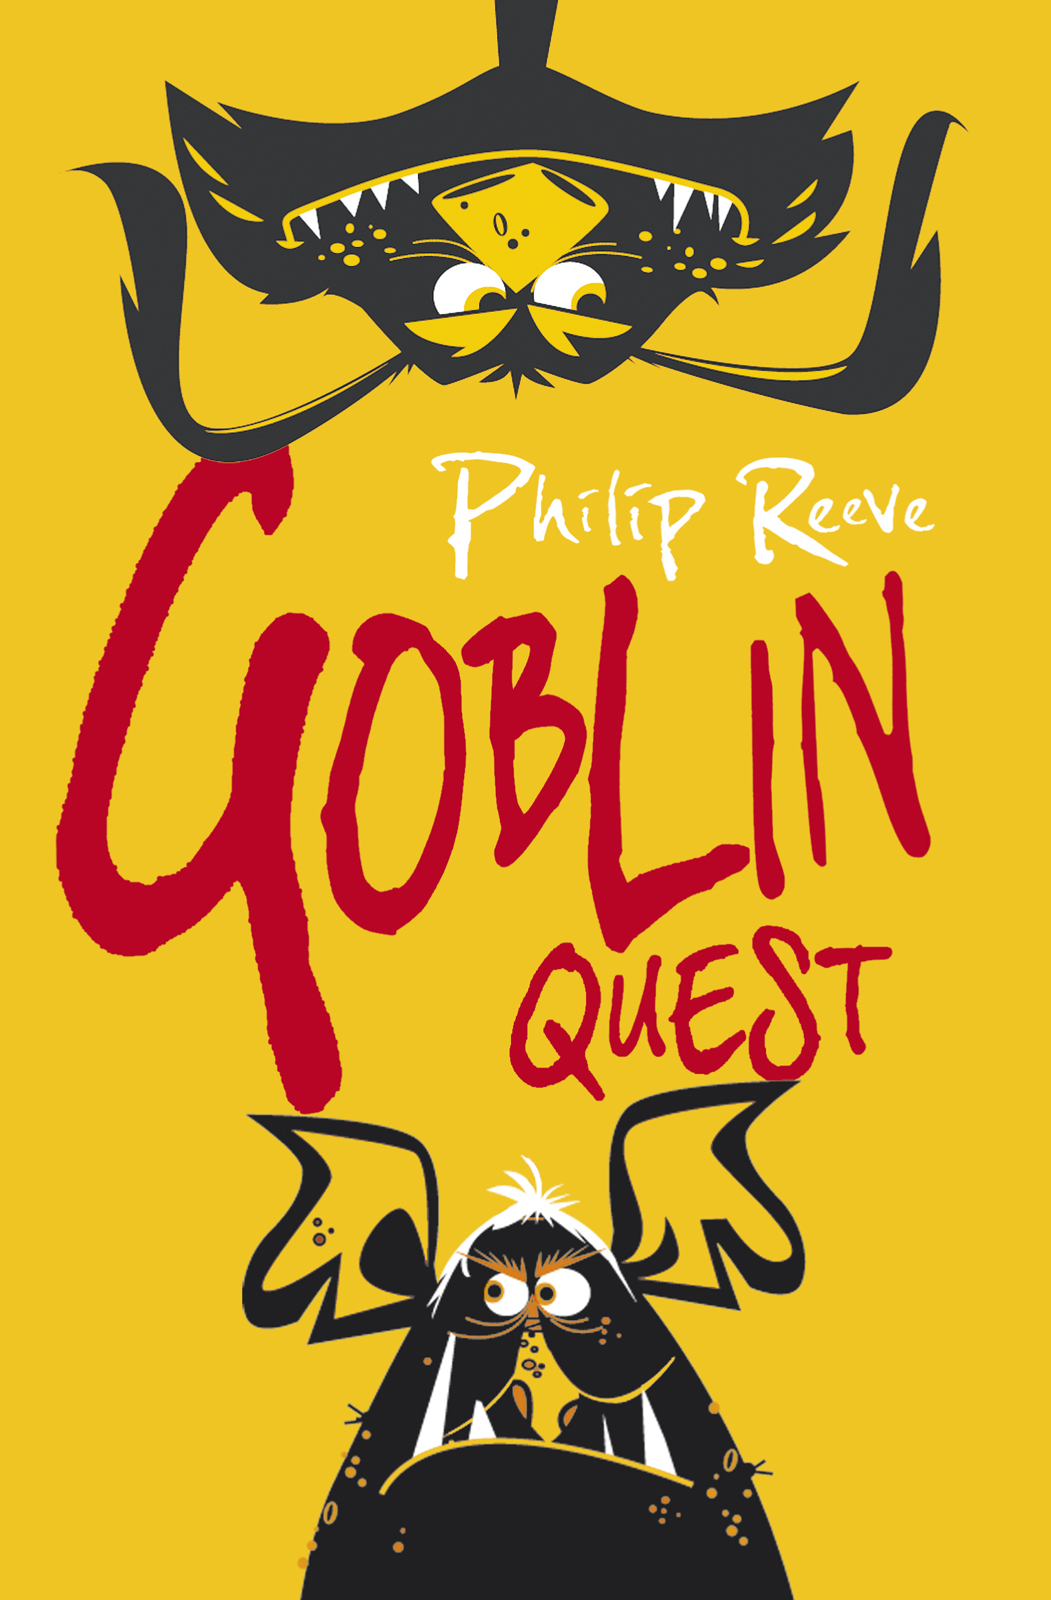 Goblin Quest (2014) by Philip Reeve